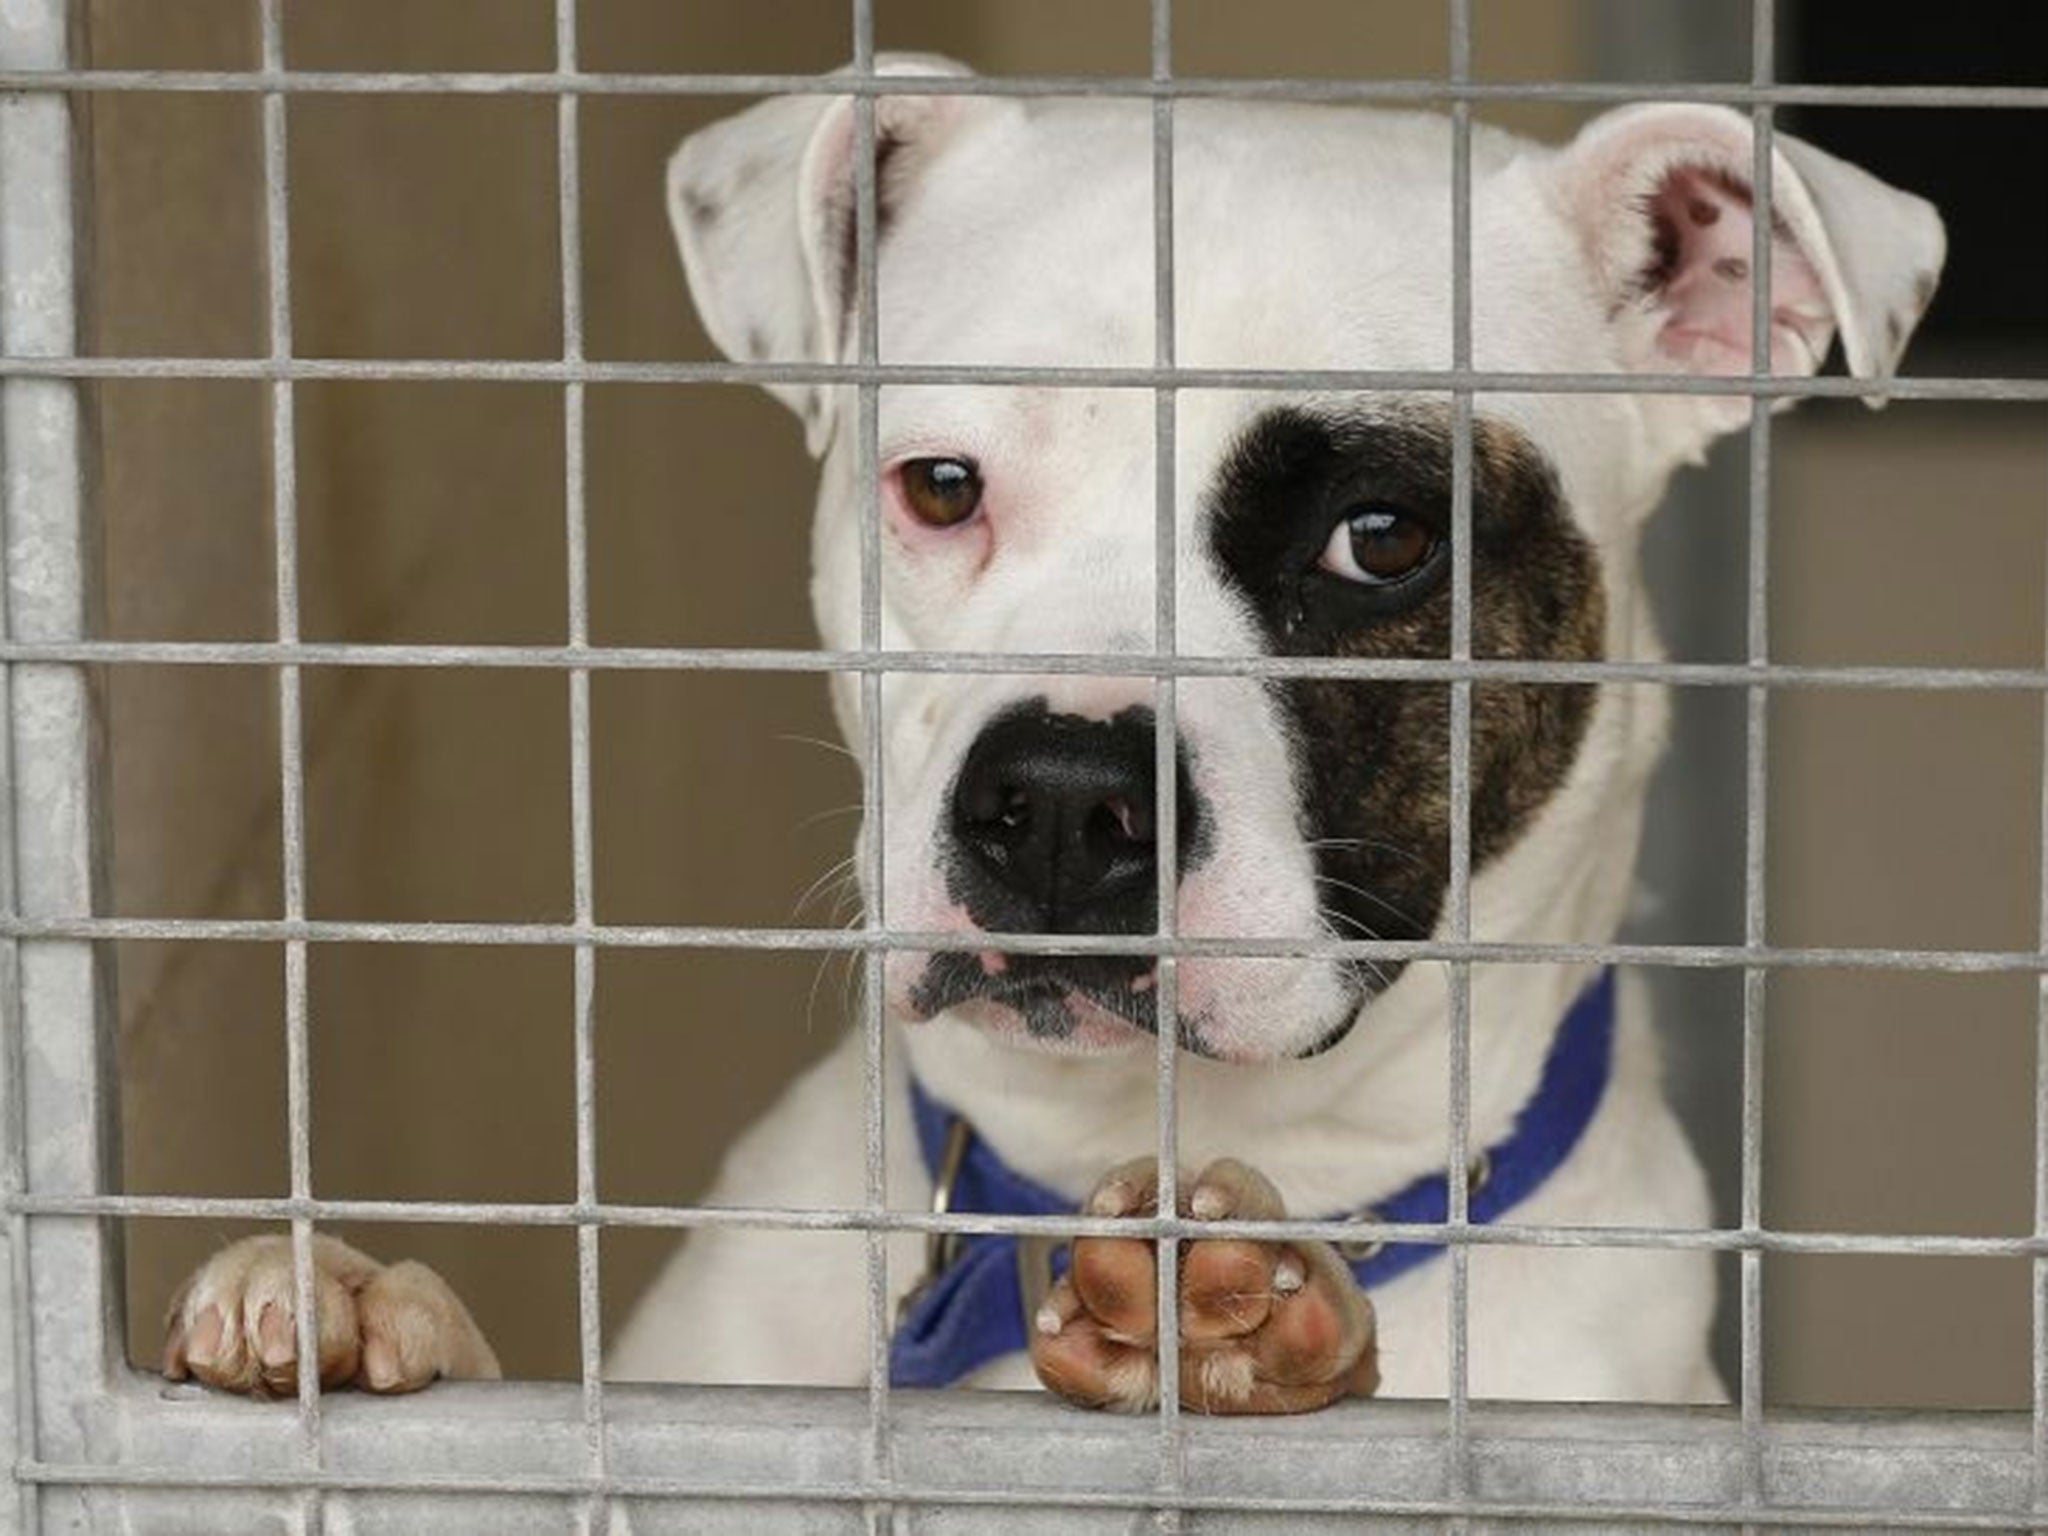 A dog rescued from a fire at Manchester Dogs' Home looks out from a cage in its temporary home at Cheshire Dogs' Home near Warrington, northern England.